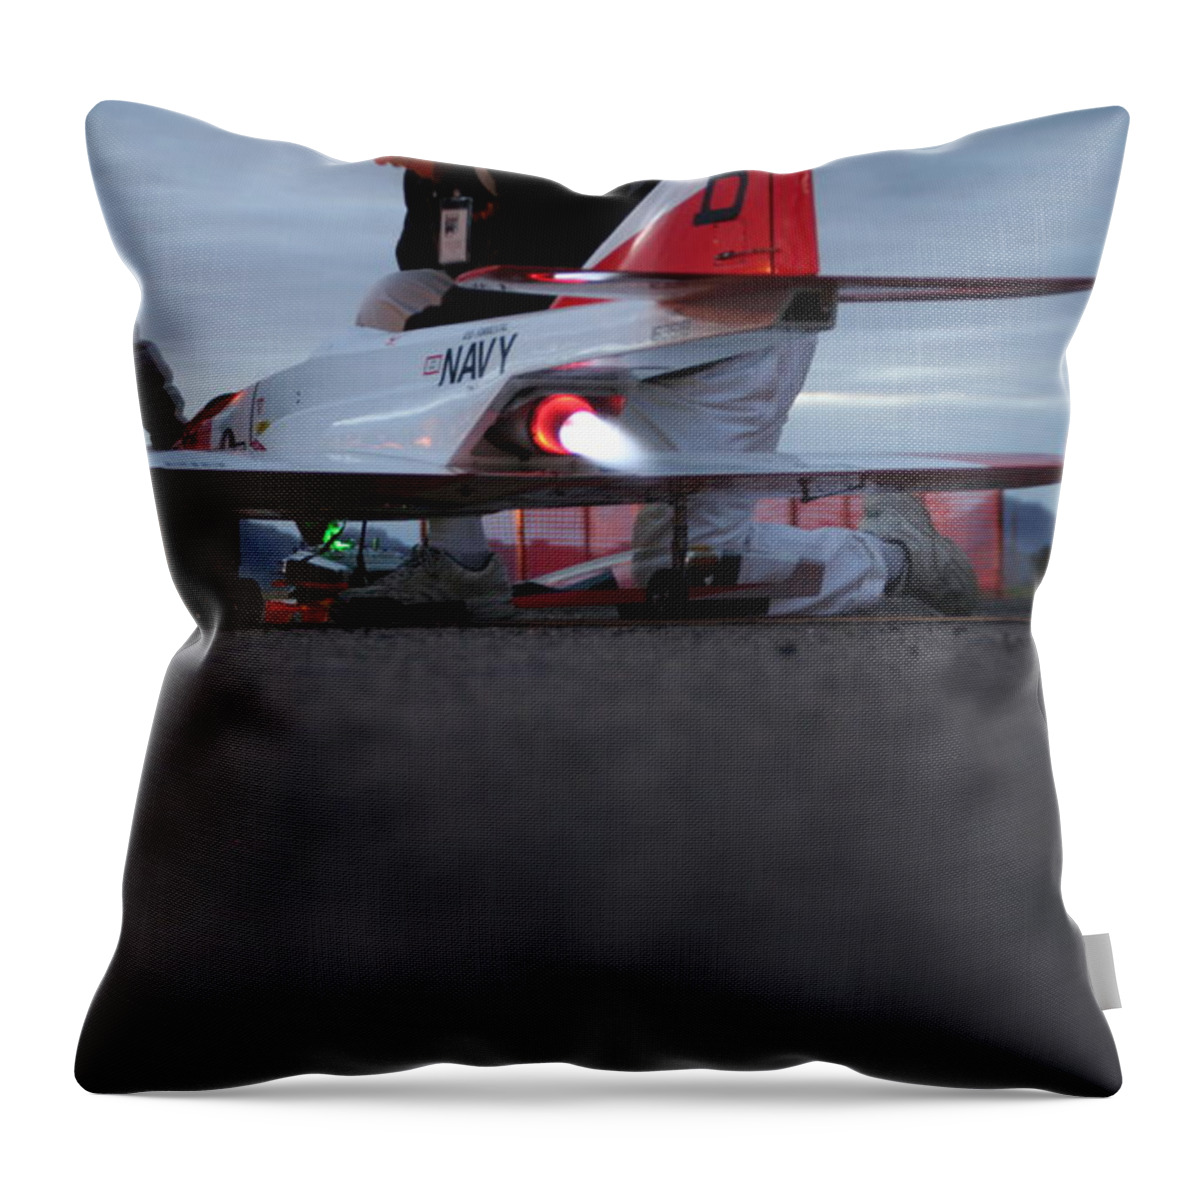 David S Reynolds Throw Pillow featuring the photograph Startup by David S Reynolds